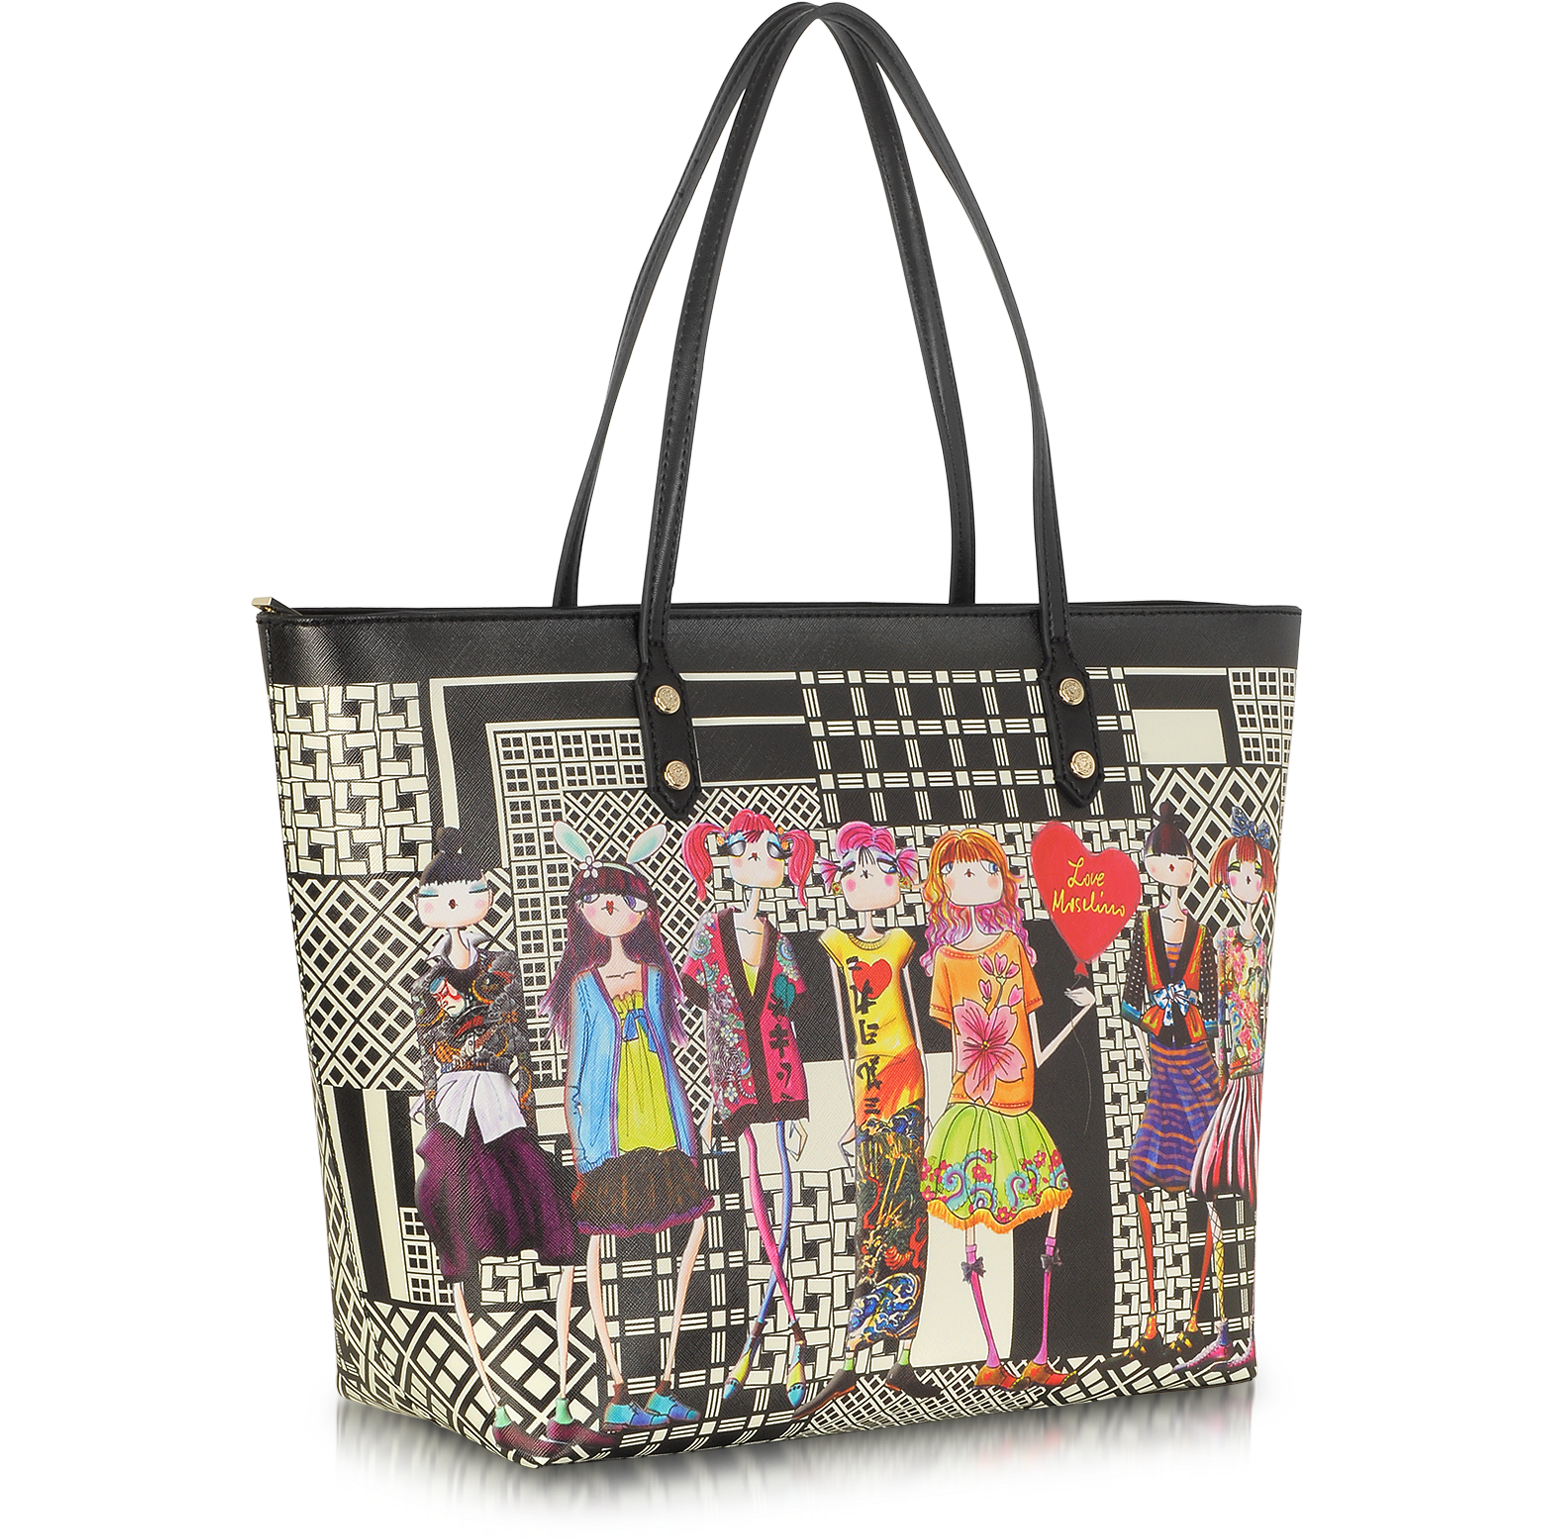 Moschino Tokyo Girls Charming Large Fabric Tote at FORZIERI